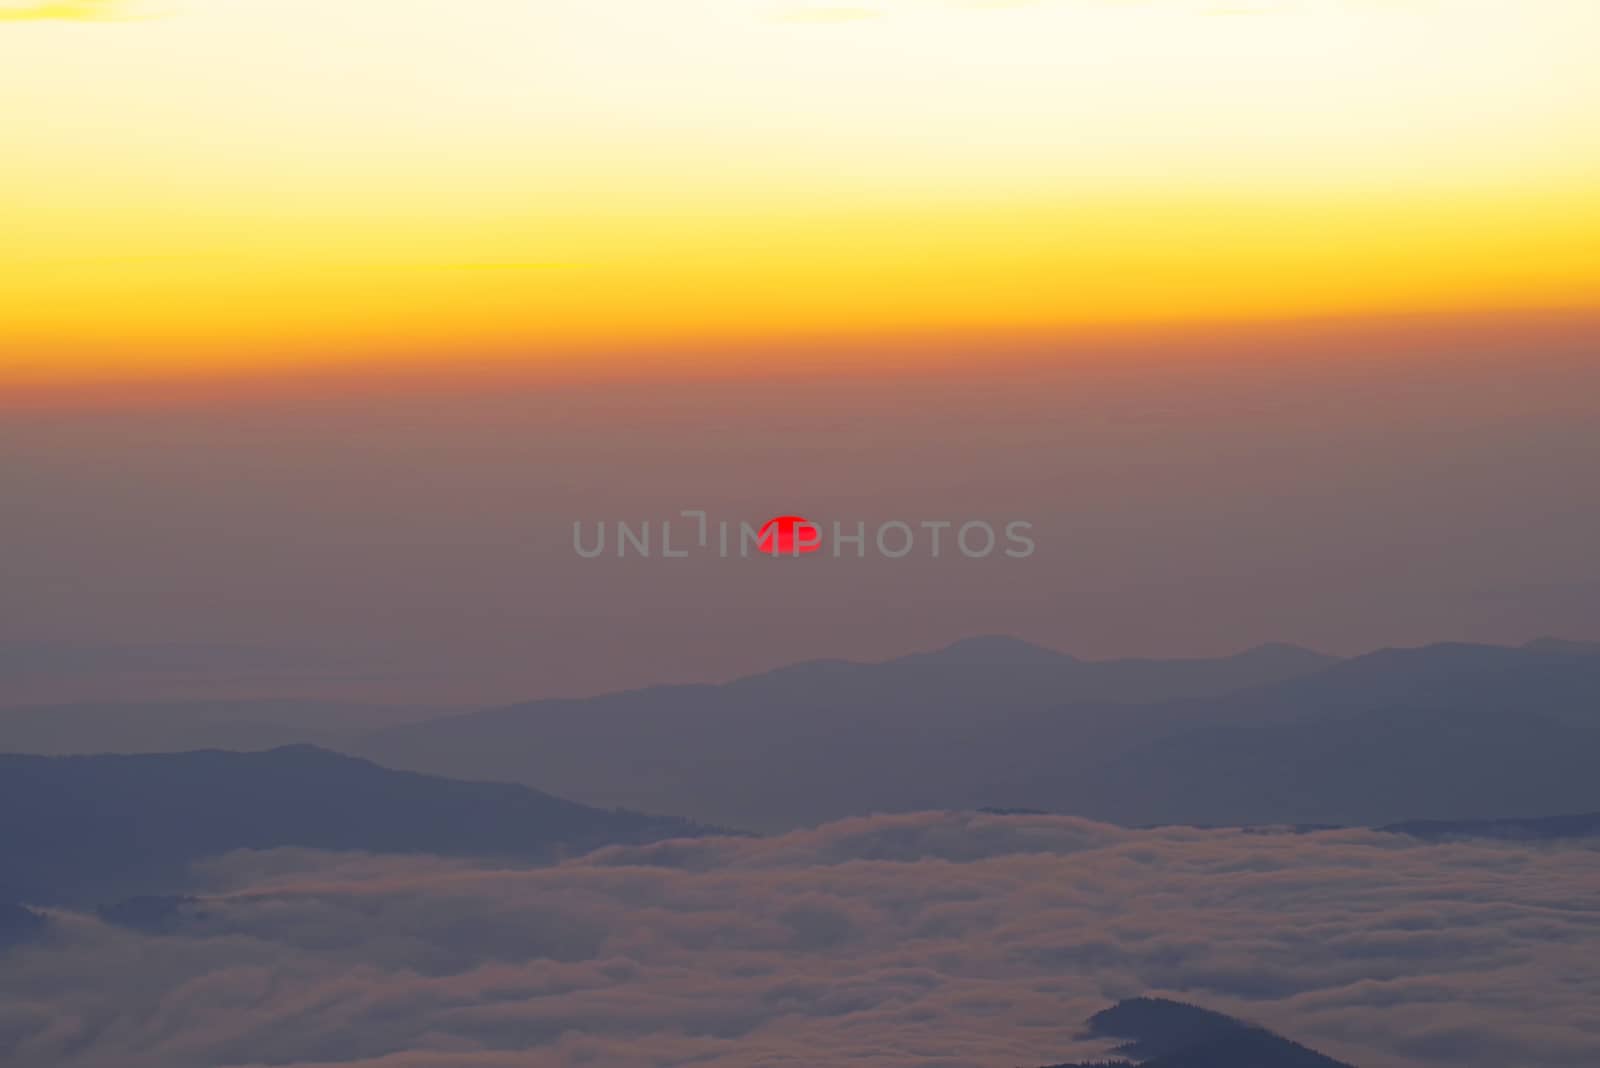 Red sun at sunrise from mountain top, low clouds and creast in valley